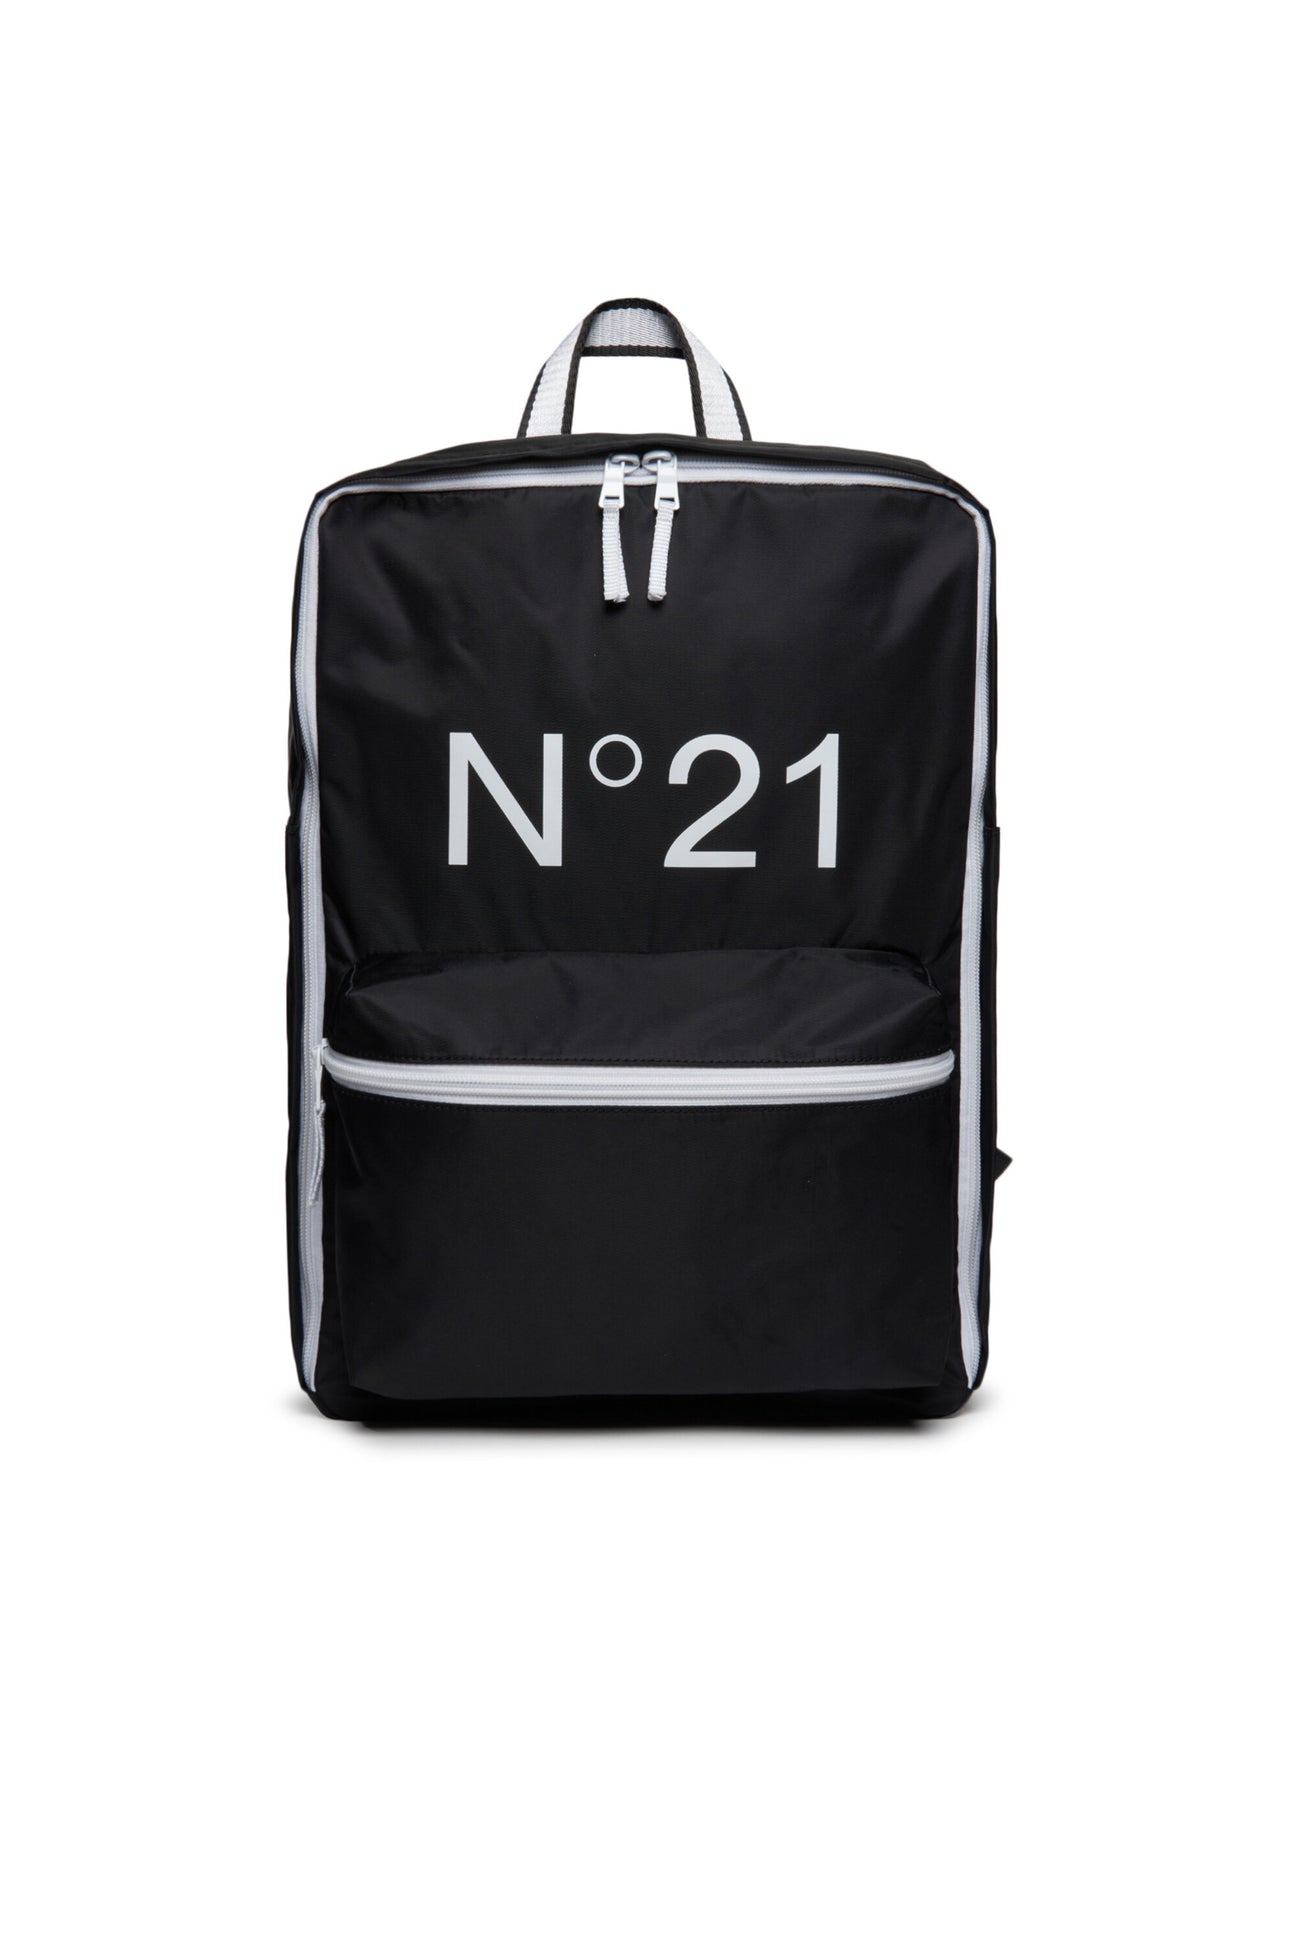 Black backpack with zip fastening and logo 